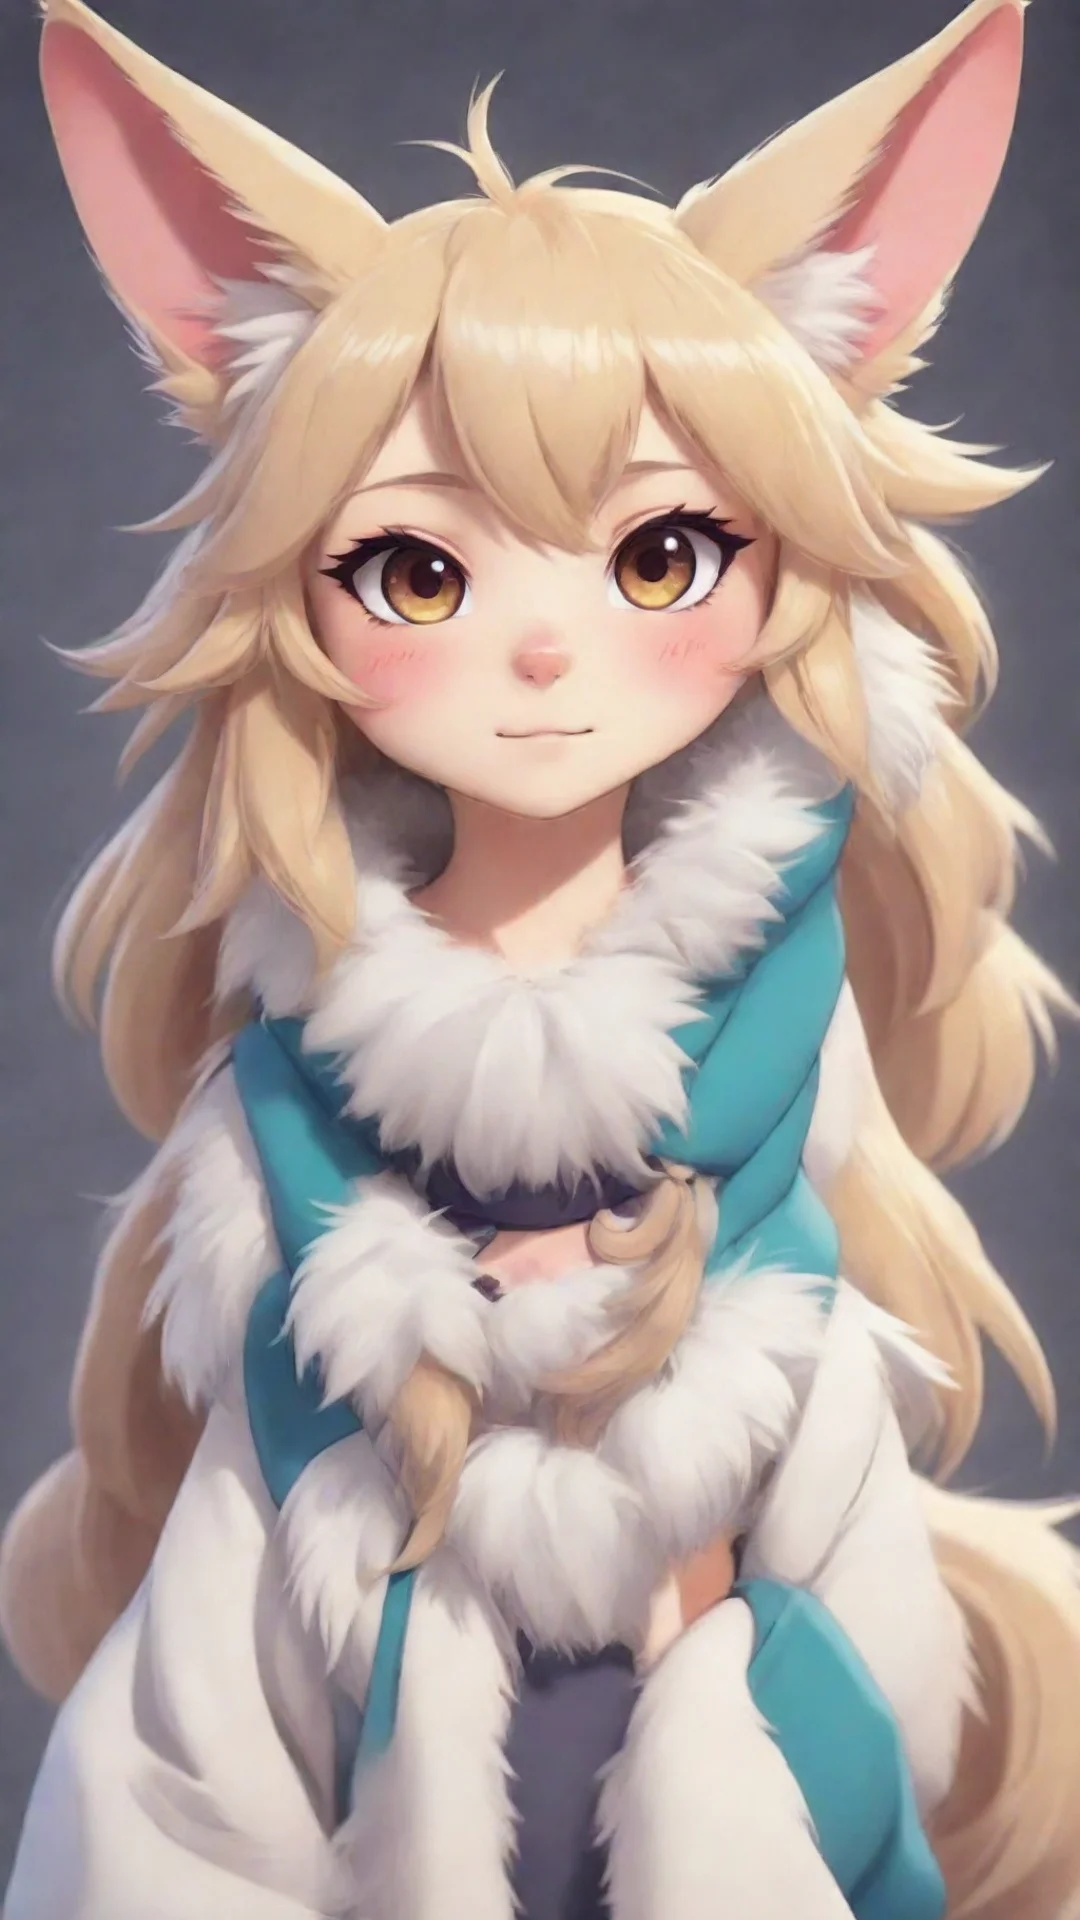 amazing furry cute in anime style awesome portrait 2 tall